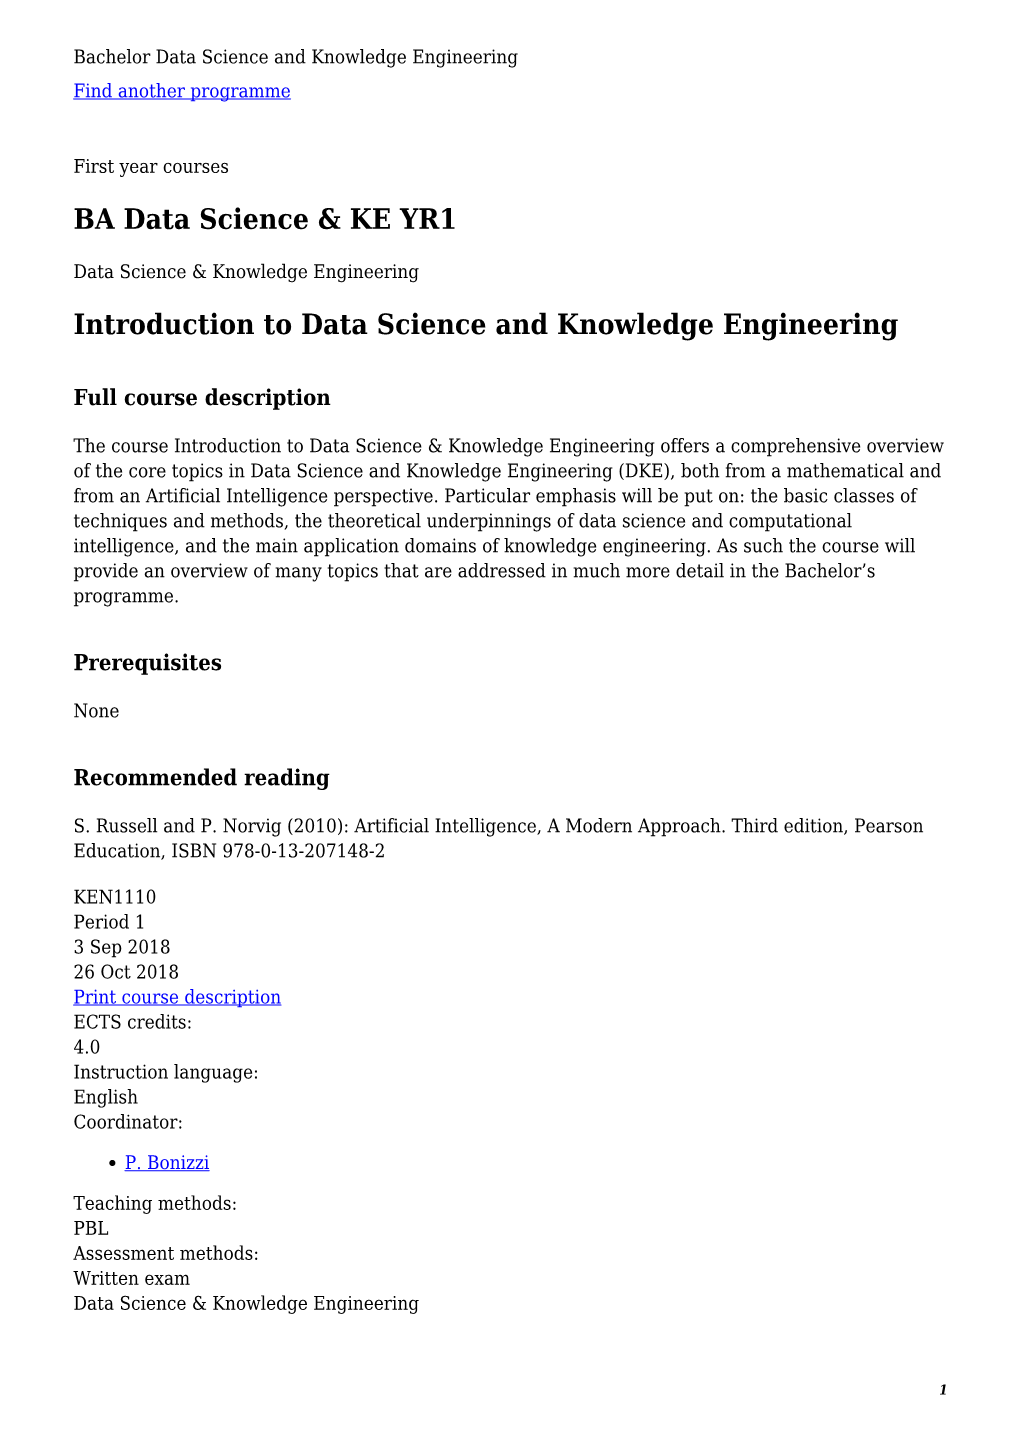 Bachelor Data Science and Knowledge Engineering Find Another Programme